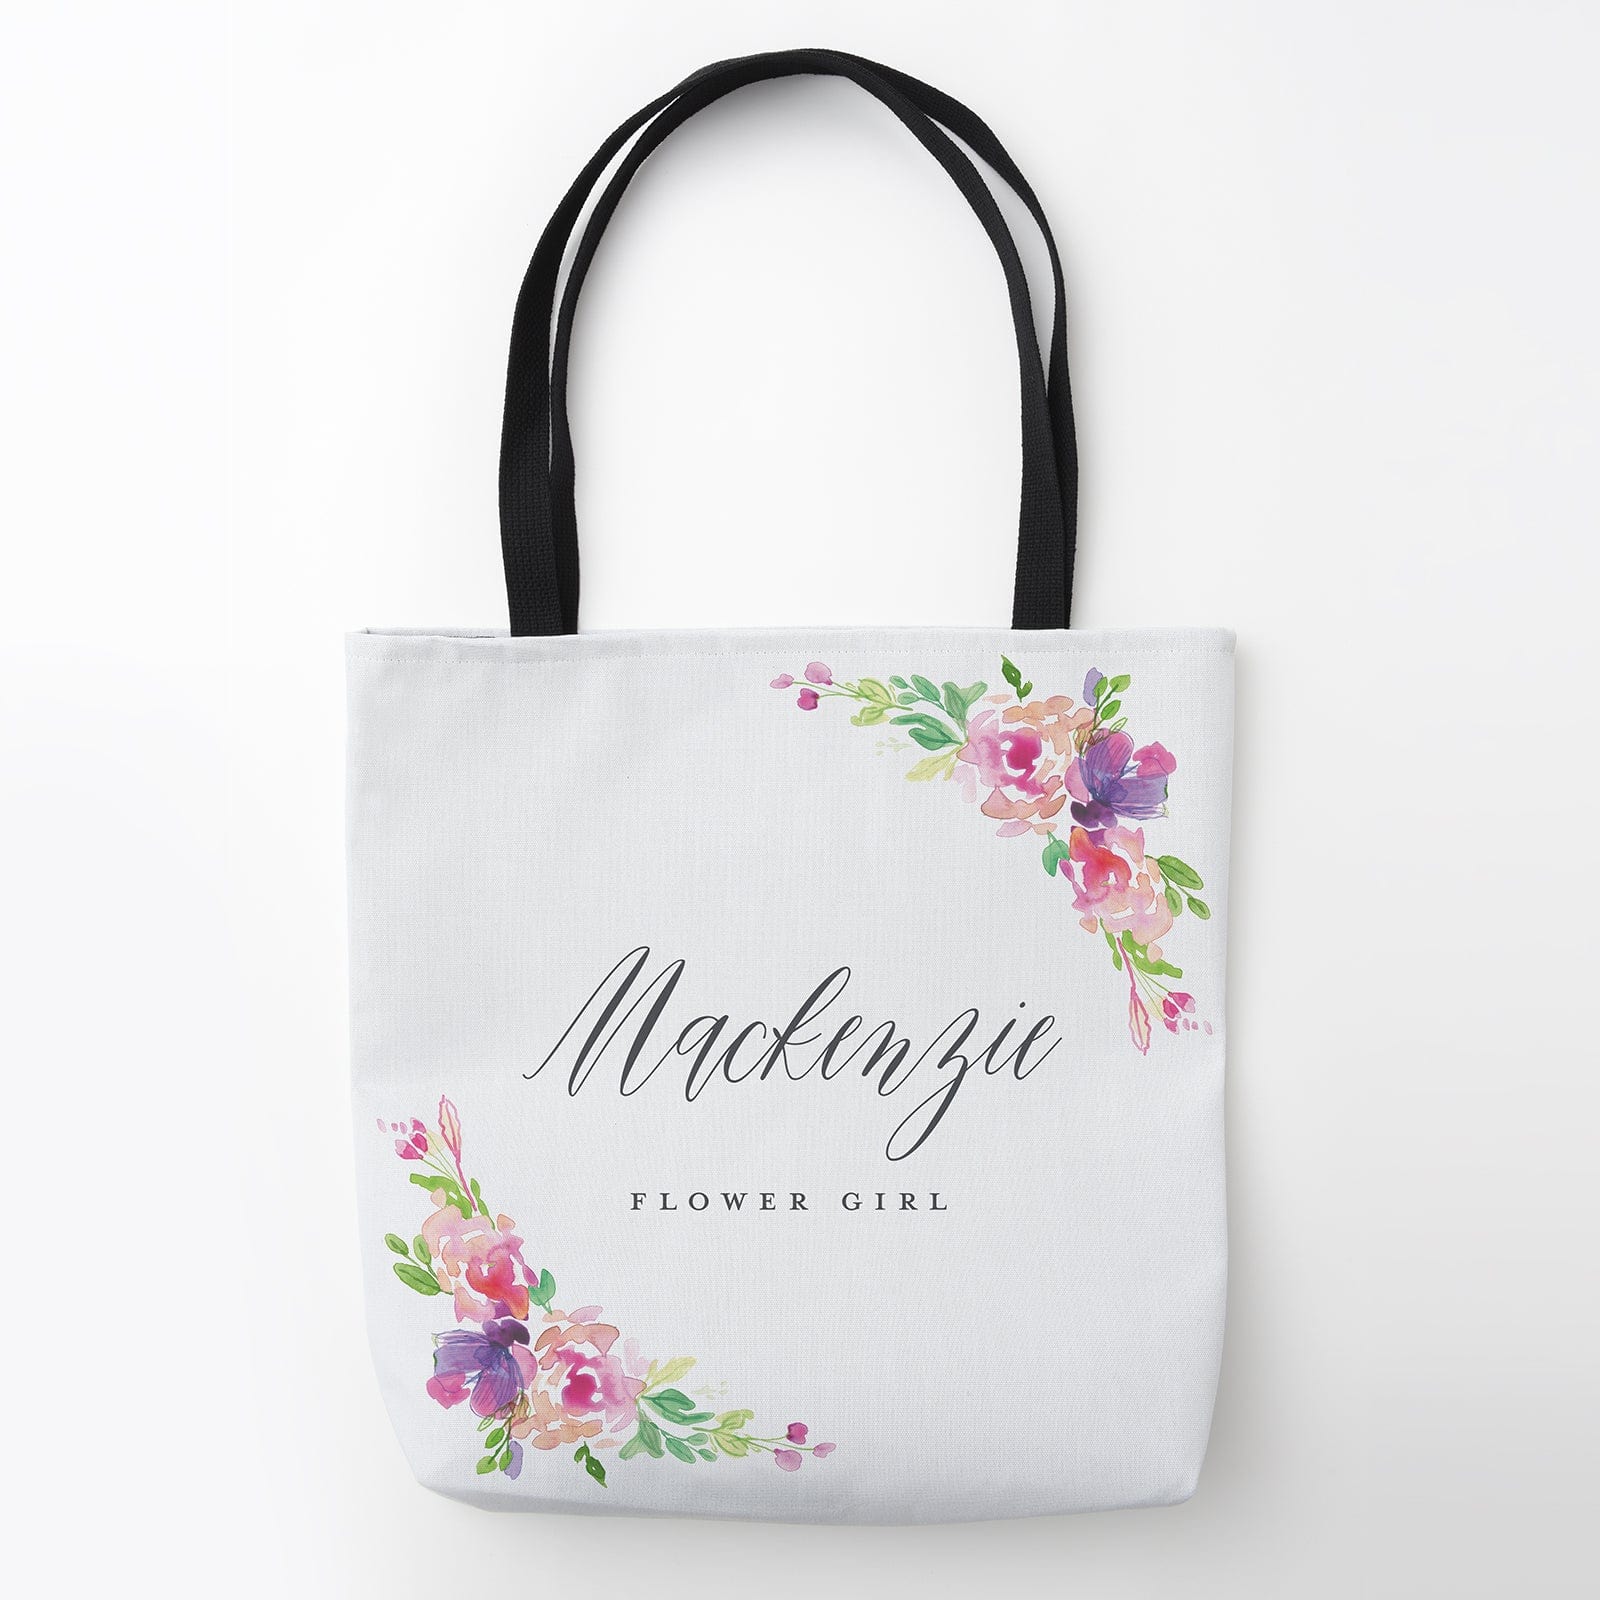 Custom Printed Tote Bags, Personalized Totes